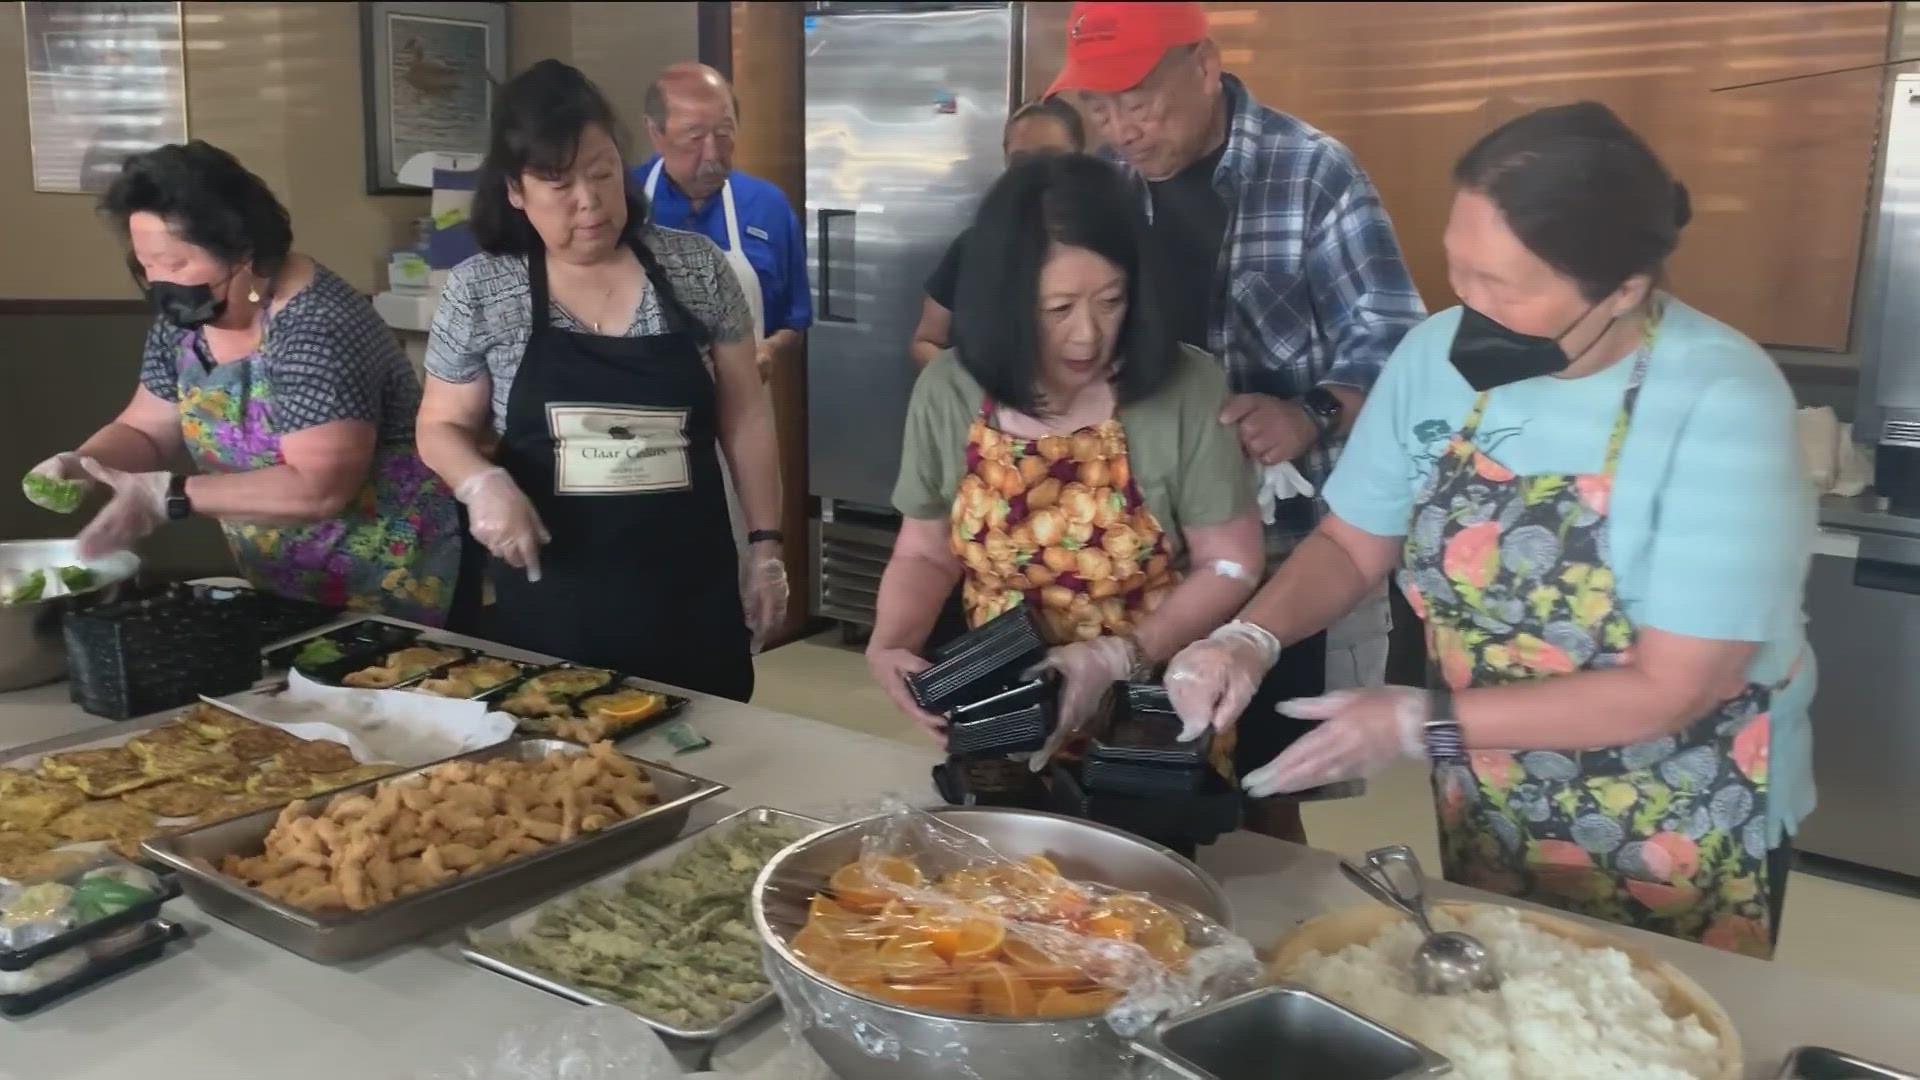 On every third Tuesday, the Snake River chapter of the Japanese American Citizens League gets together to make bento bowls for those who came before them.